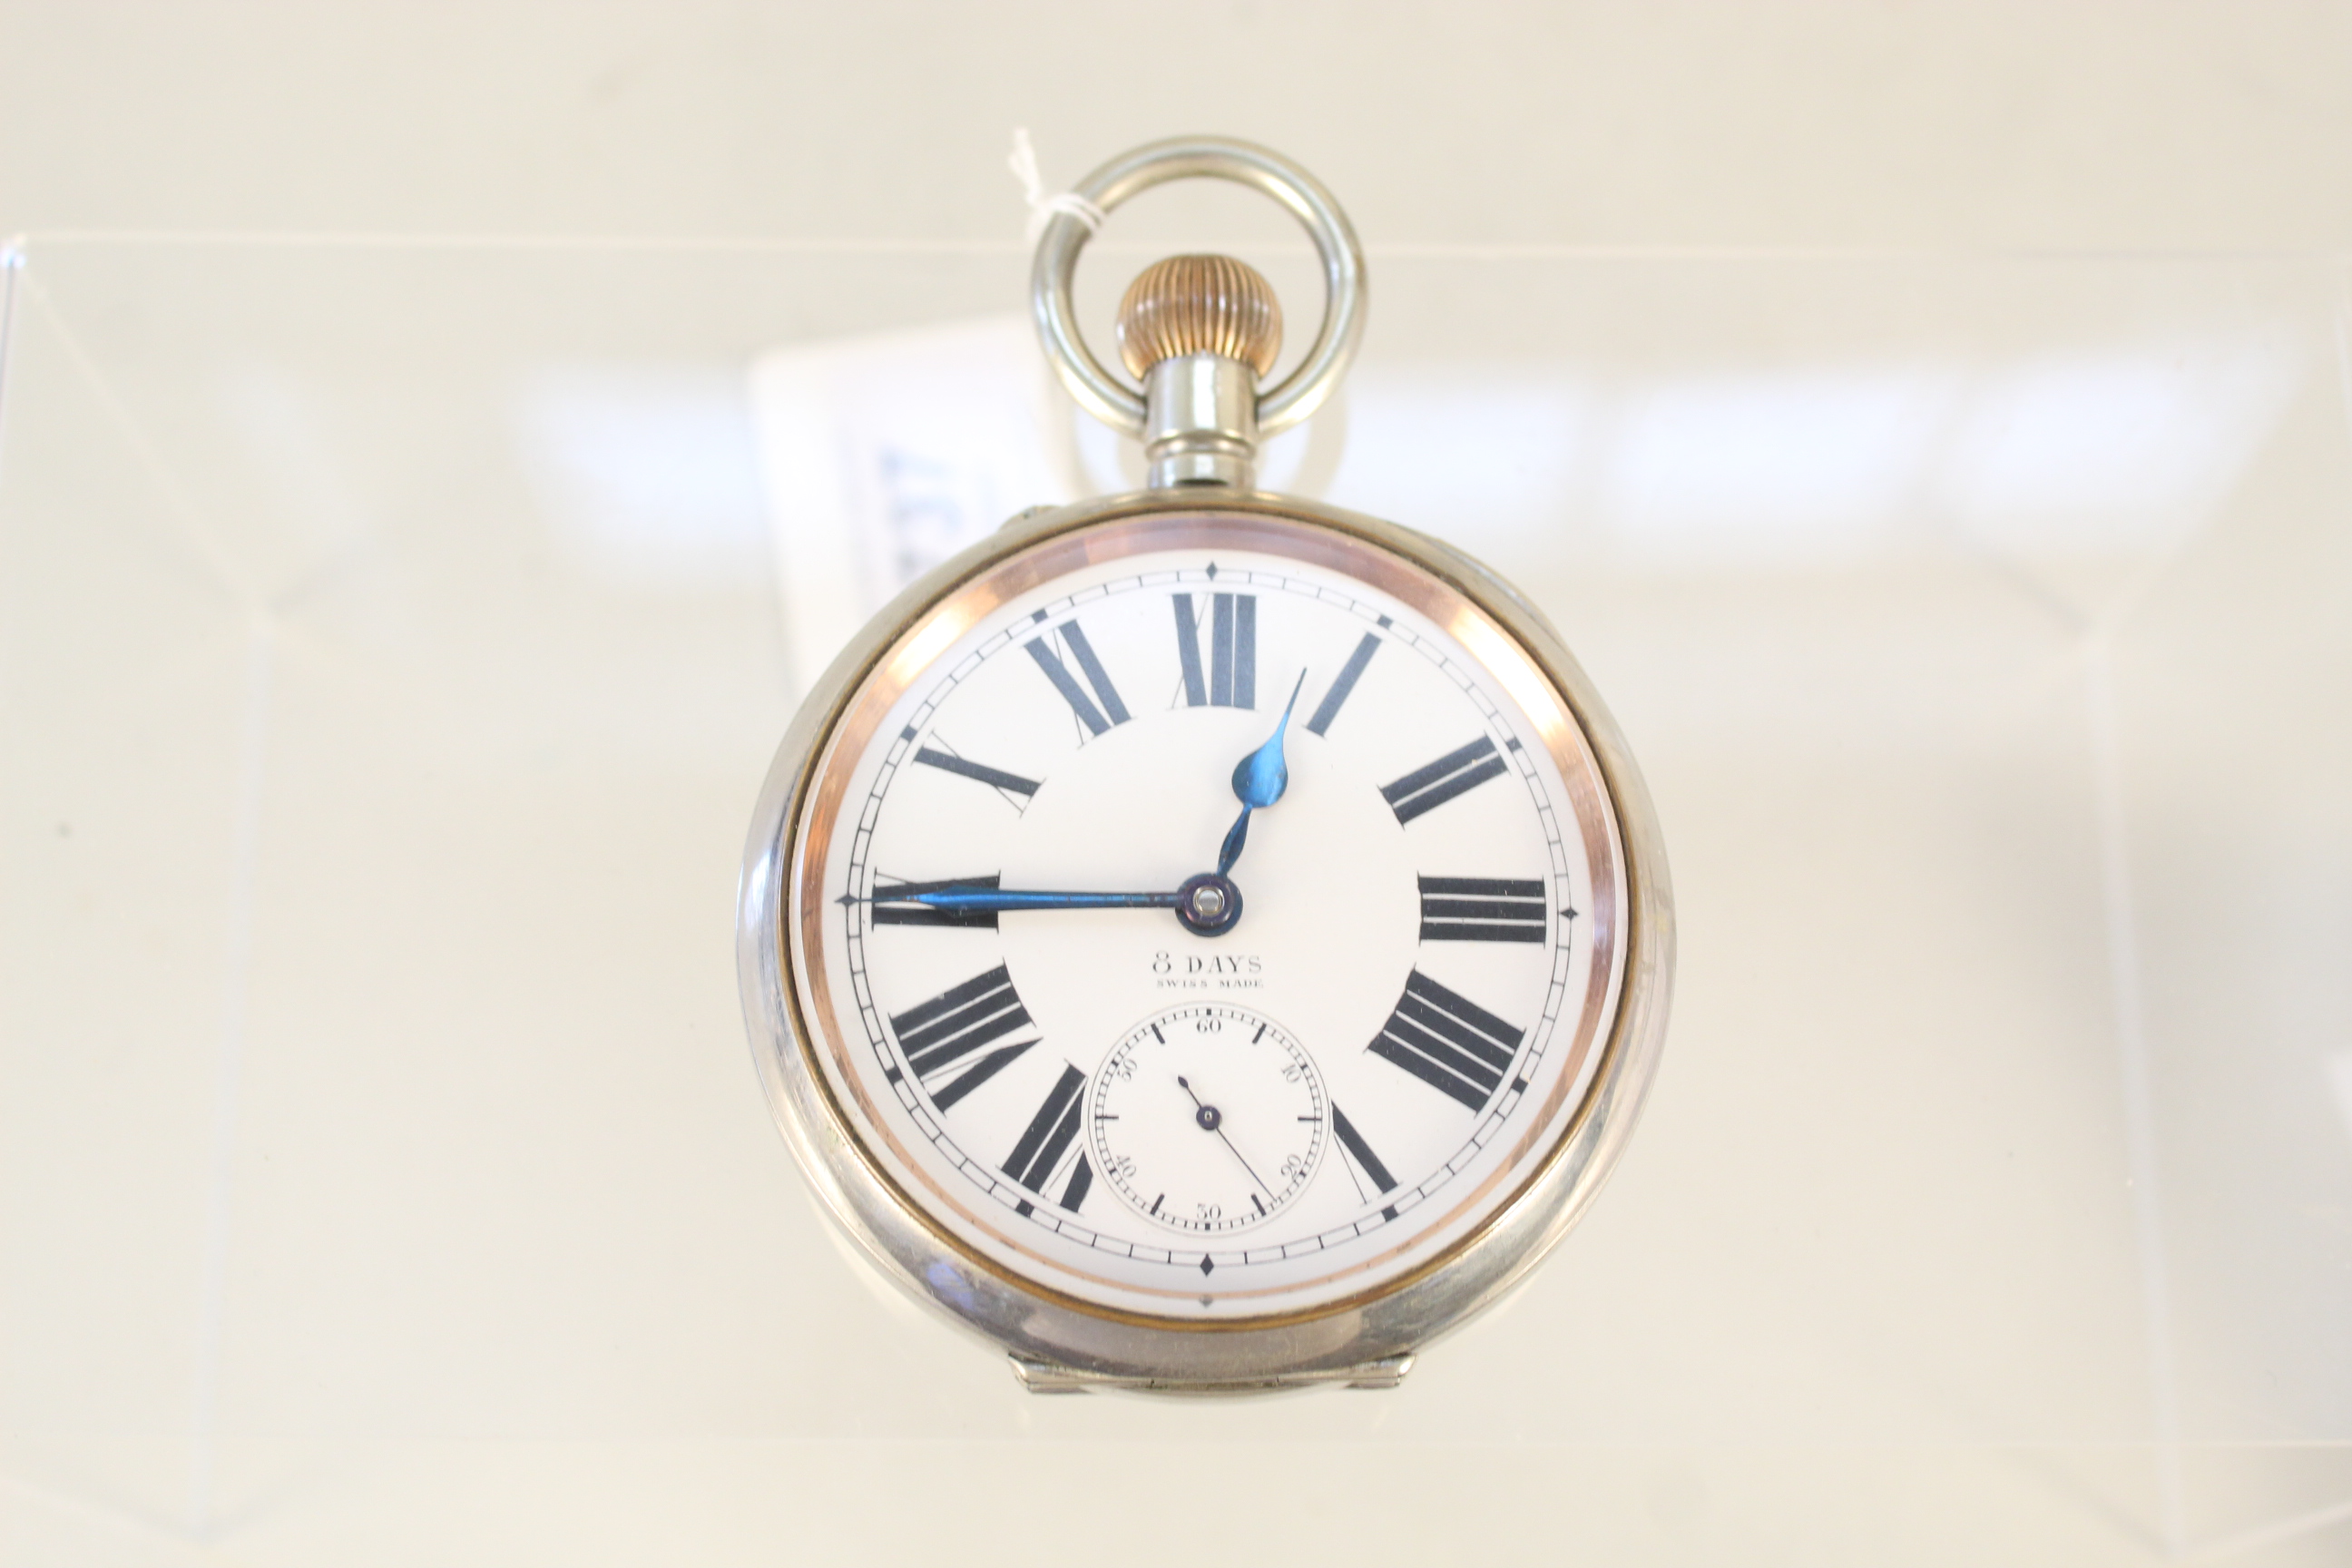 An 8 day nickel plated Goliath pocket watch